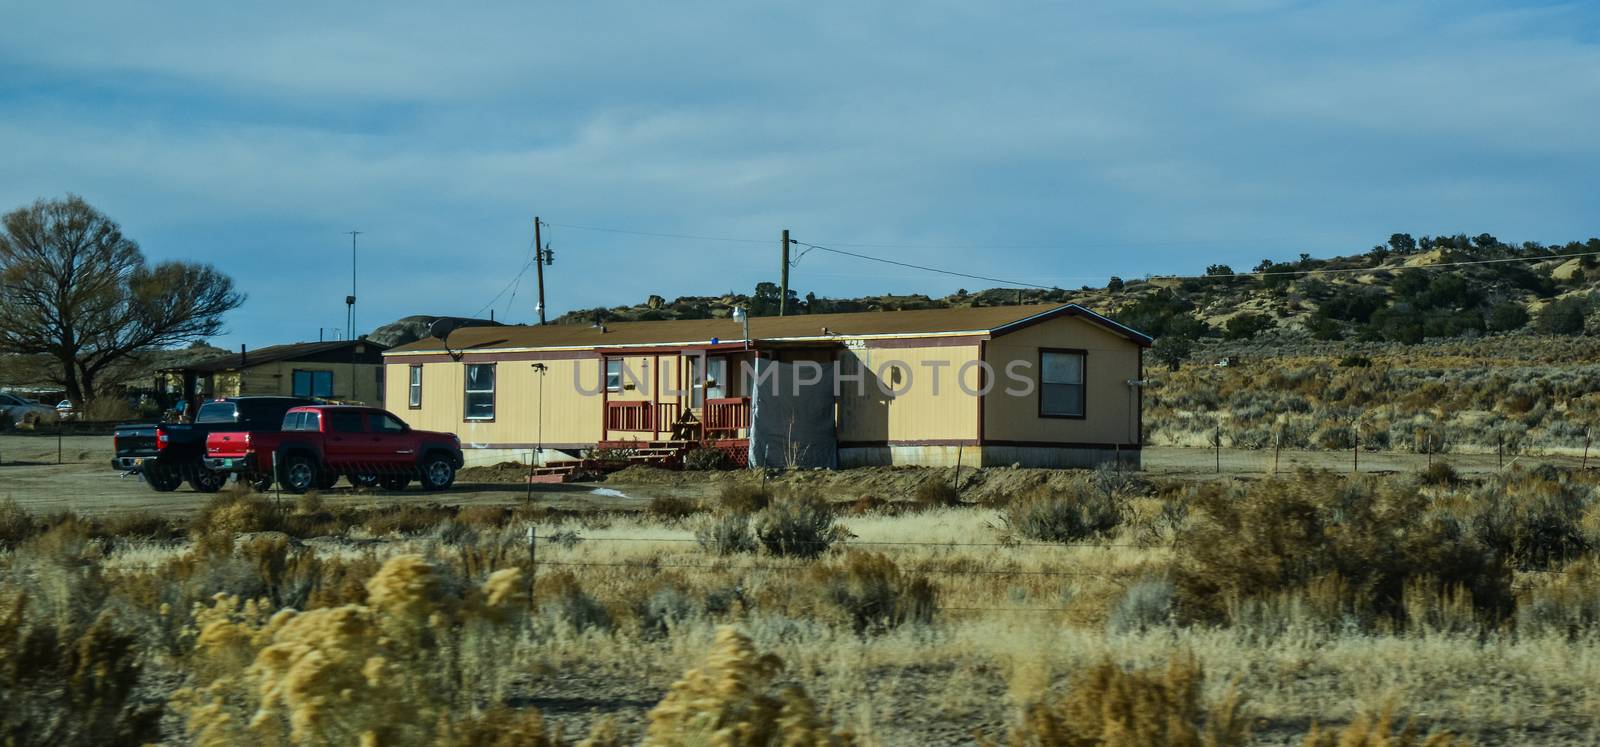 Typical Native American Reservation Homes in New Mexico, USA by Hydrobiolog